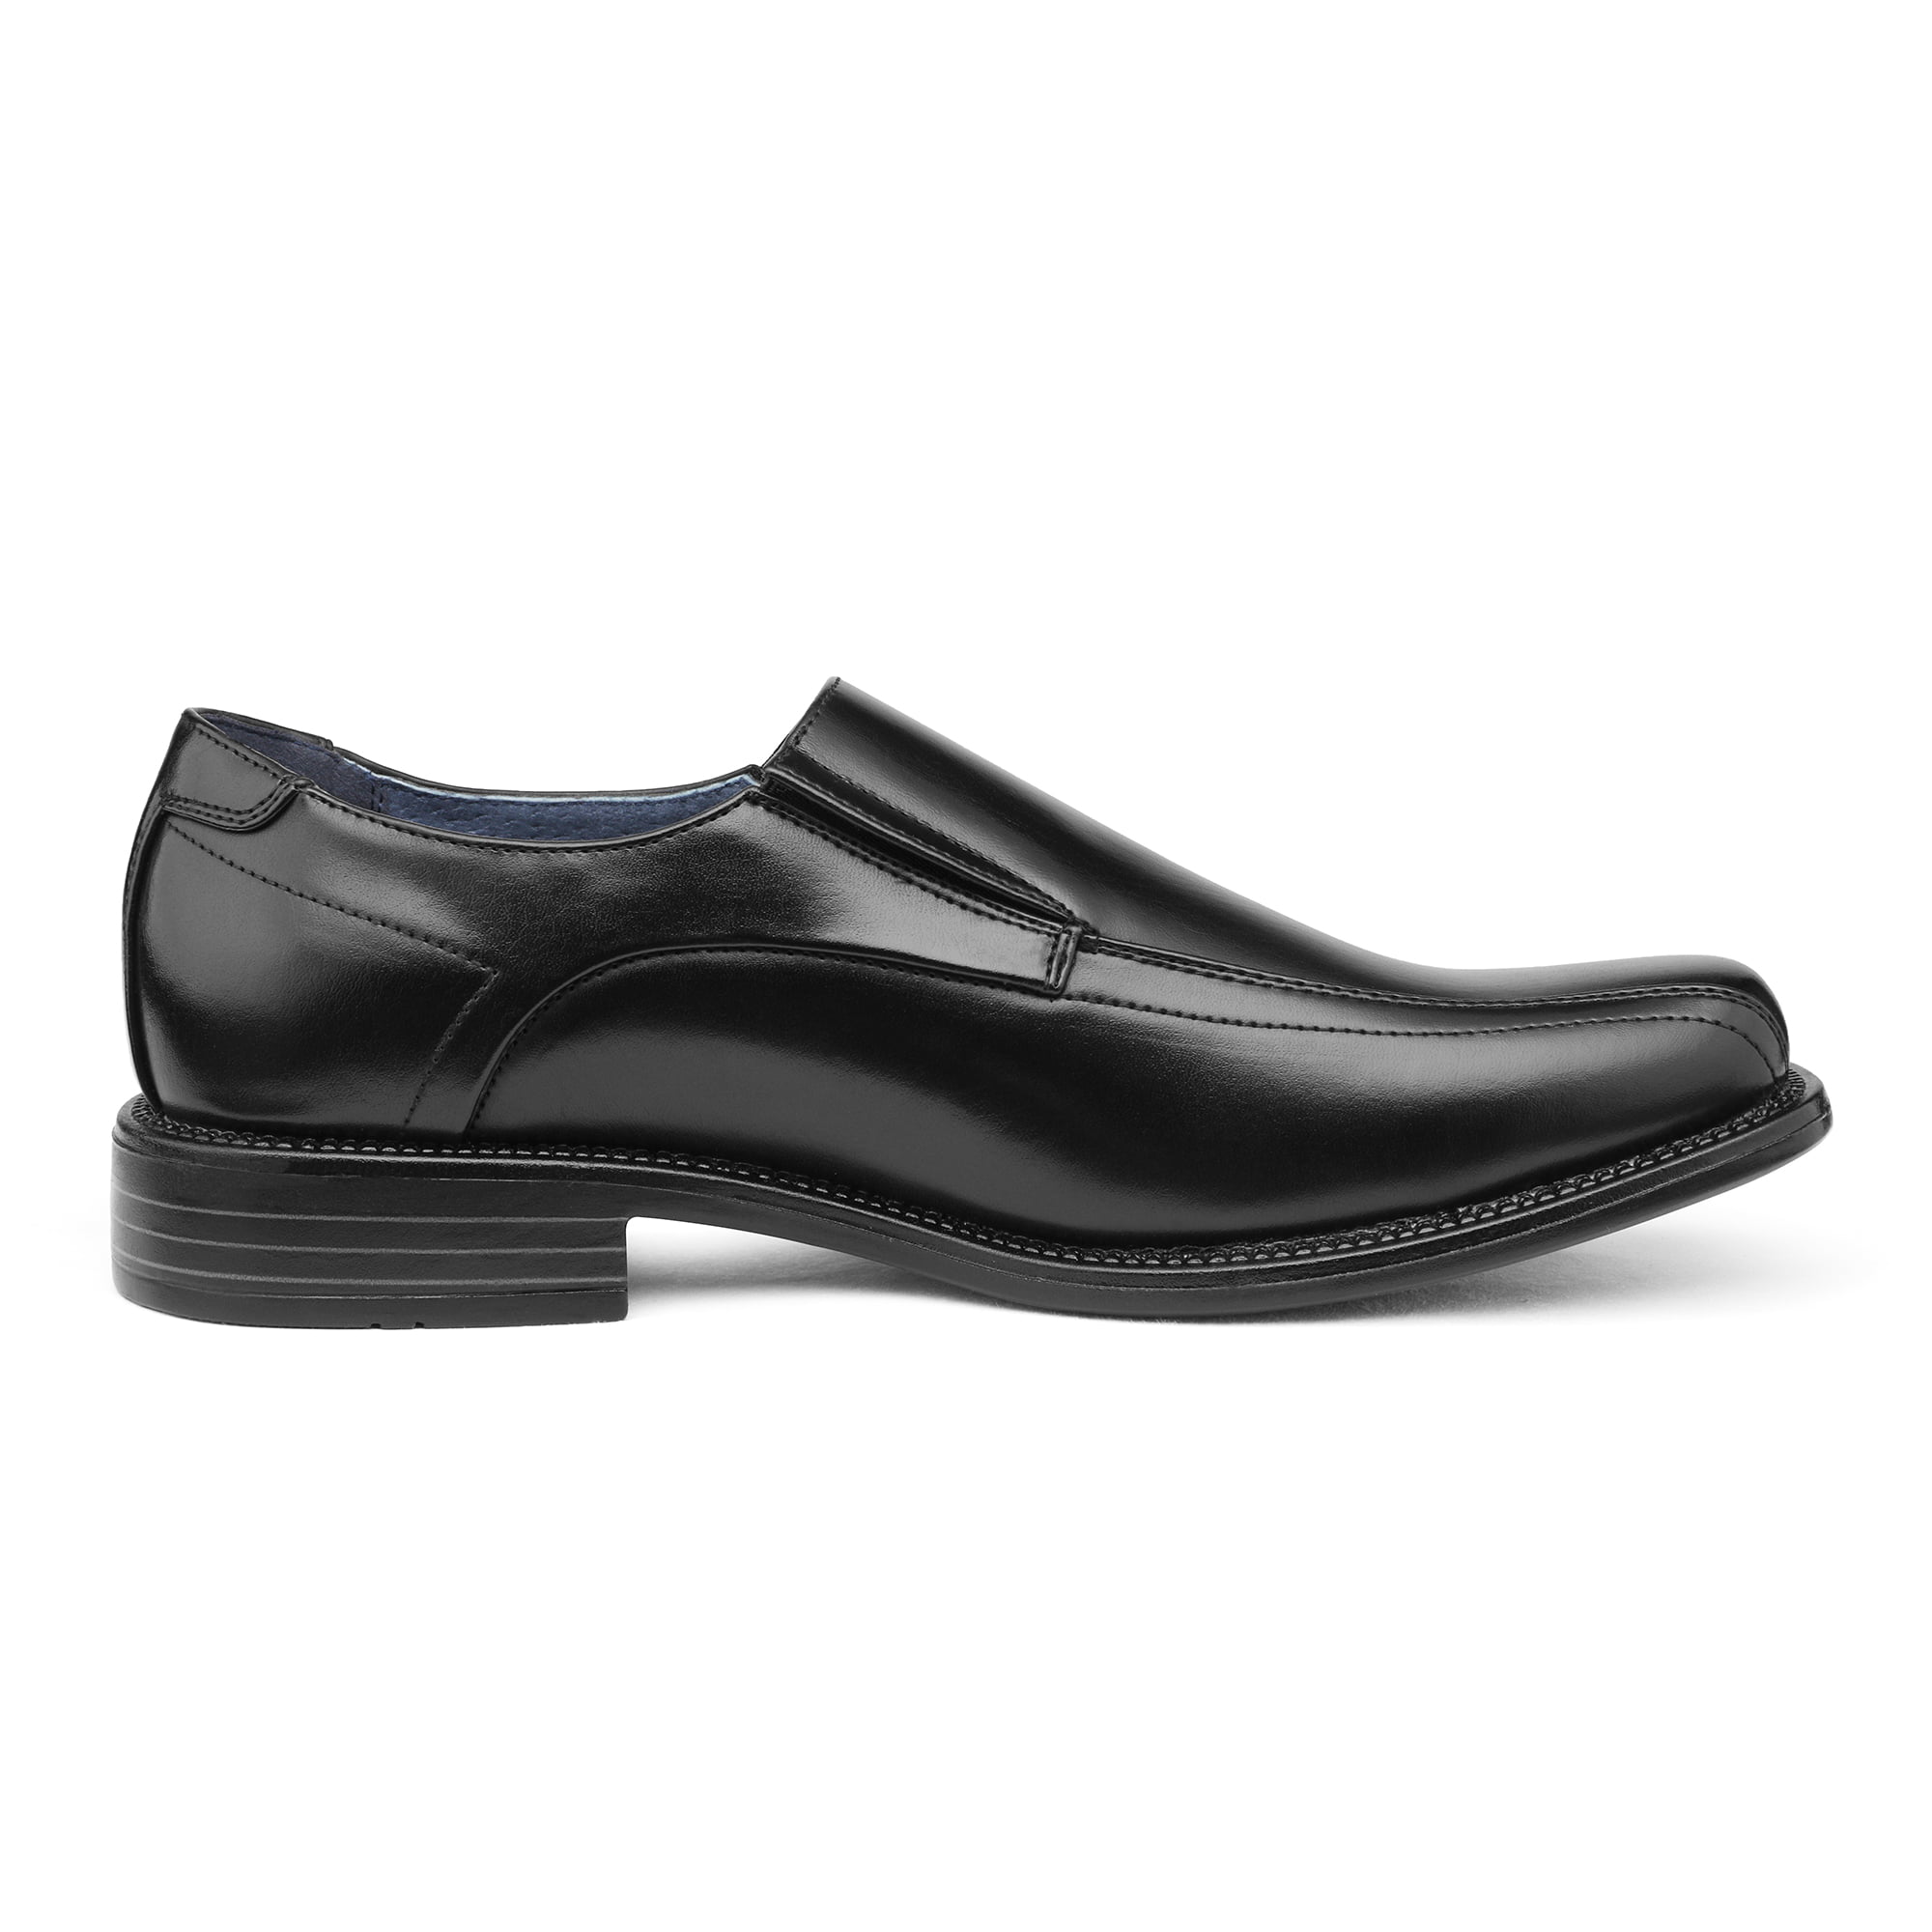  UUBARIS Men's Formal Leather Loafers for Work Office Tuxedo  Shoes Walking Shoes Black Size 6